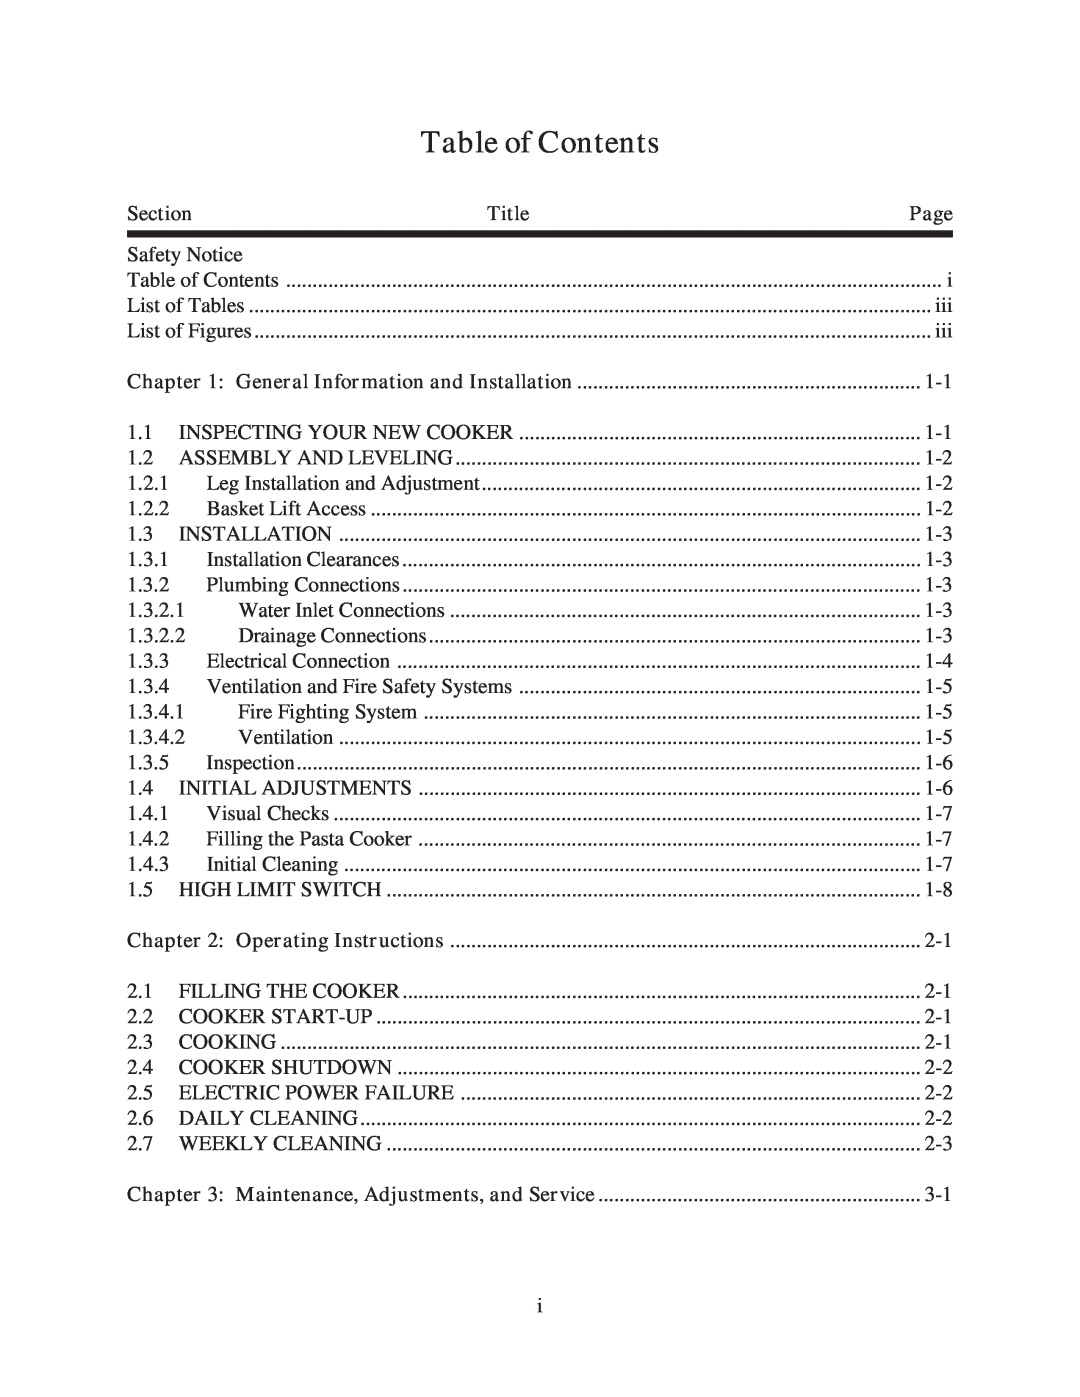 Pitco Frialator and RSE14, PPE14-L manual Table of Contents, Section, Title, Page, General Information and Installation 